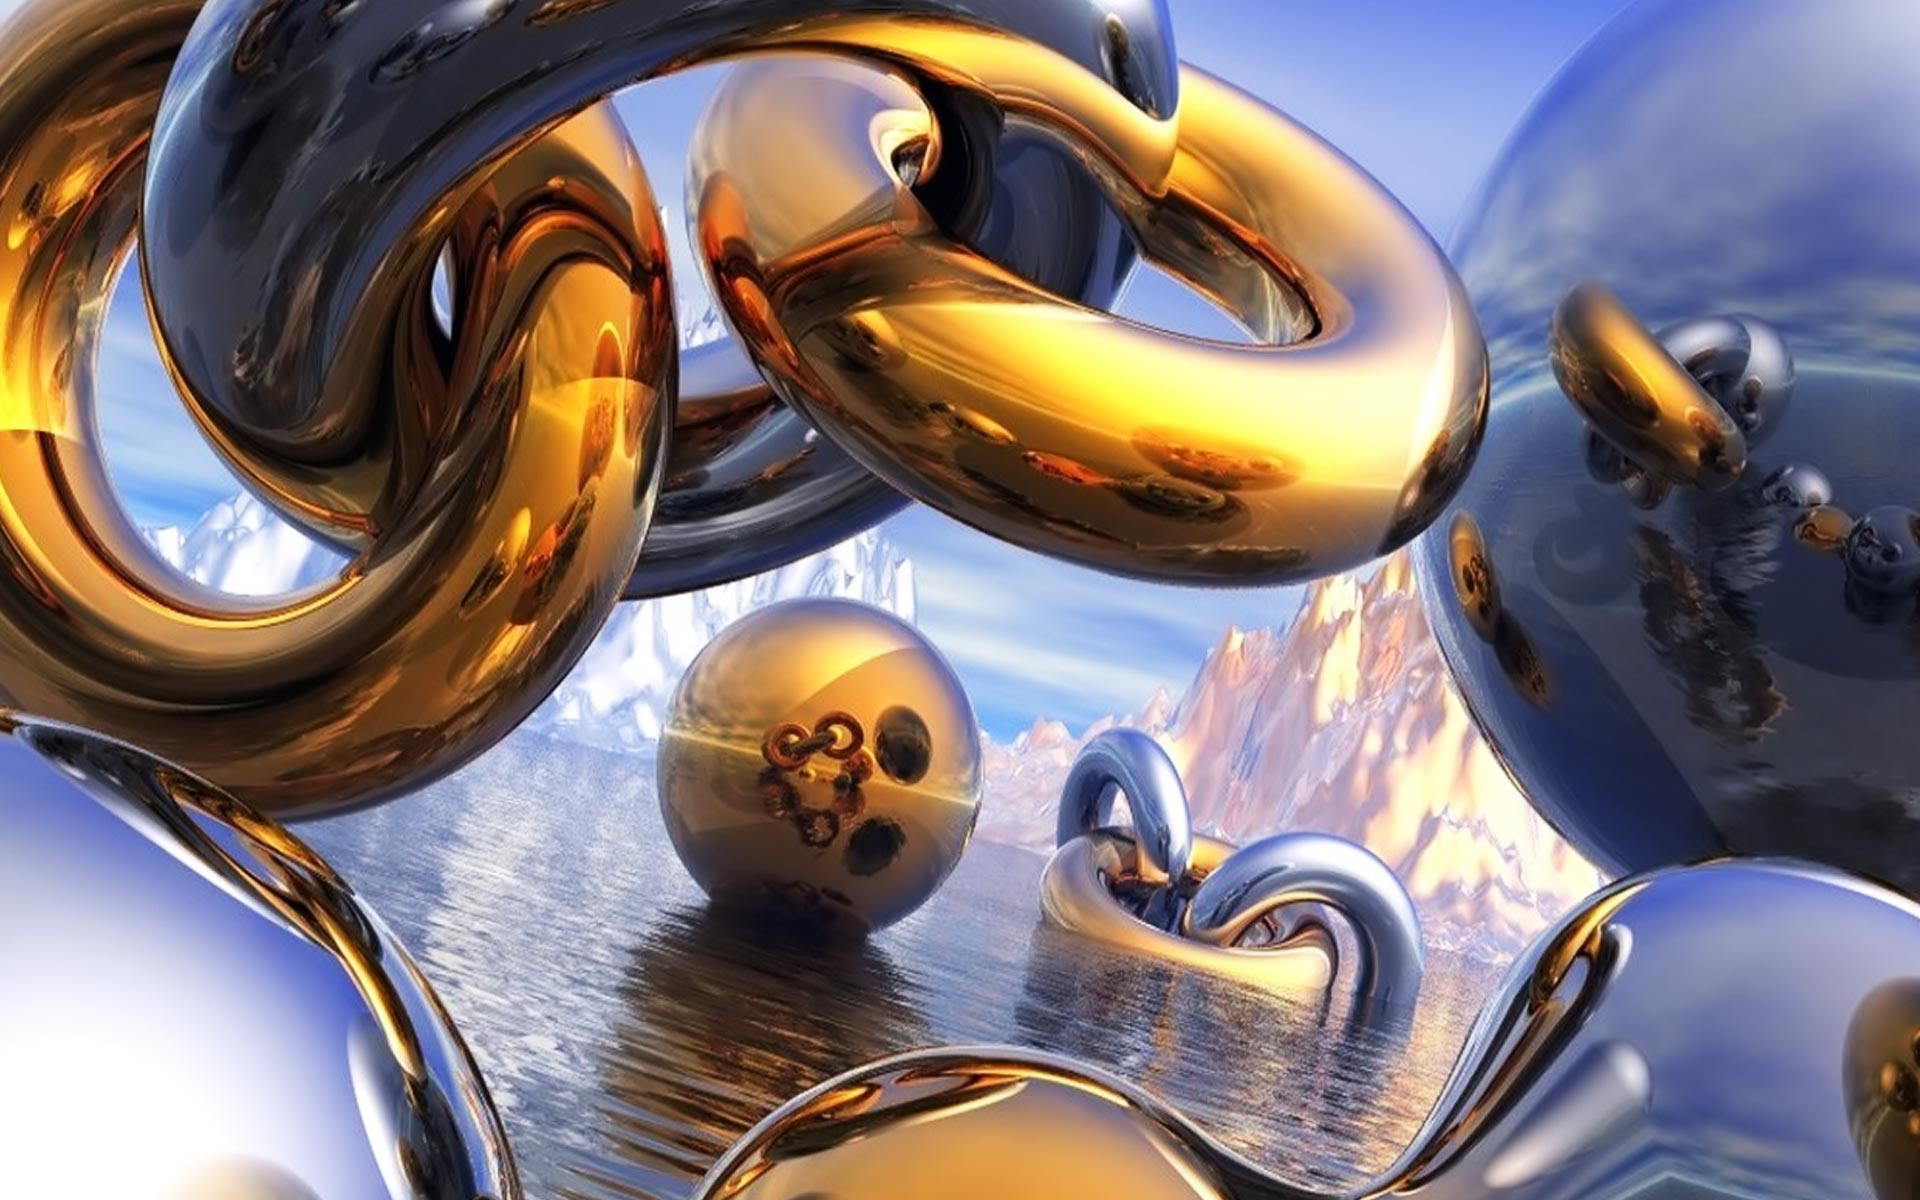 3d, abstract, metal, water, sphere, gold, cgi